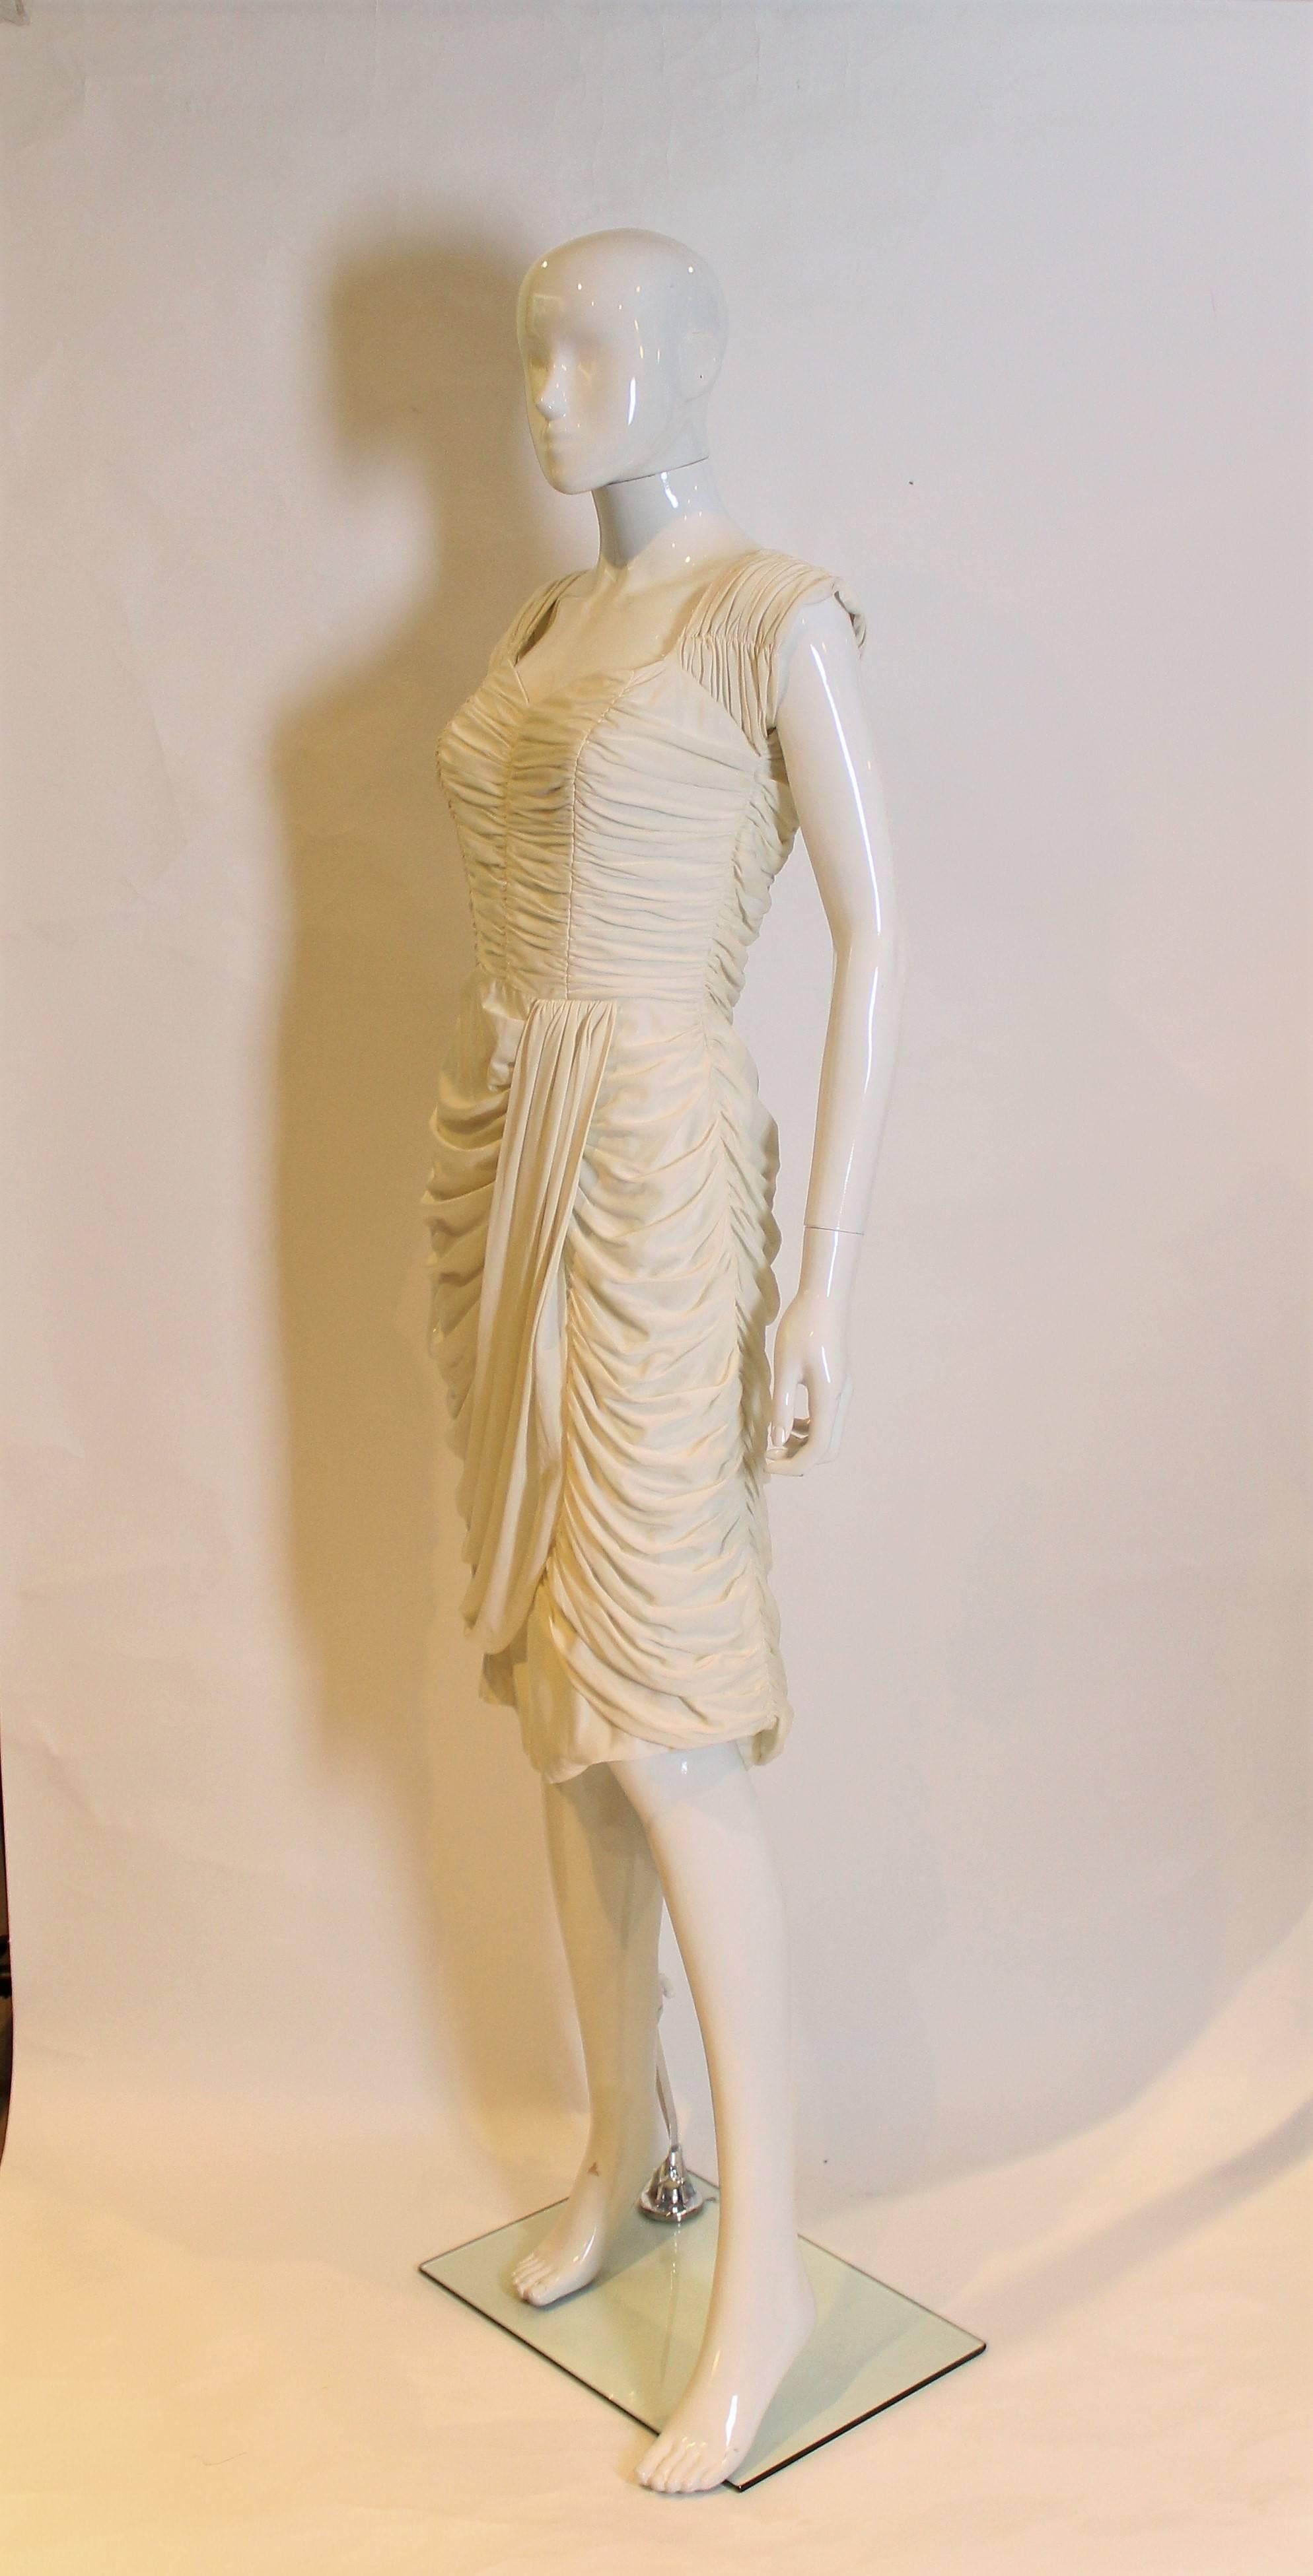 A white cocktail dress with gathierinng and folds, a possible wedding dress?
The dress has a sweetheart neckline, foldover skirt,  central back zip and is fully lined.